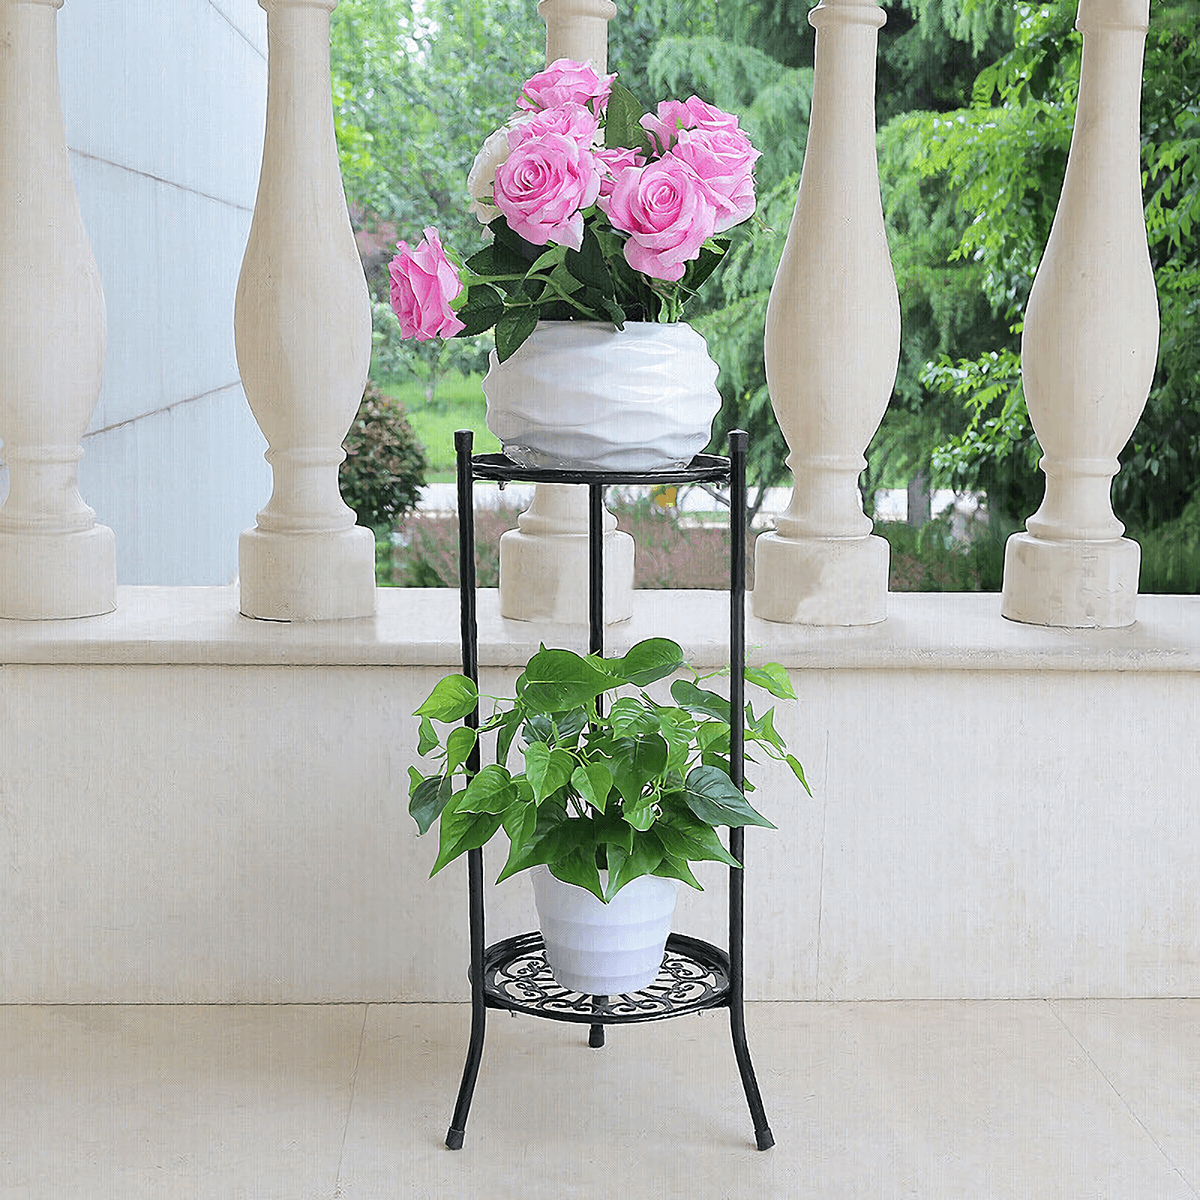 2-Layers-Flower-Rack-Tray-Landing-Flower-Pot-Rack-Iron-Flower-Shelf-Plant-Stands-for-Living-Room-Out-1779611-7